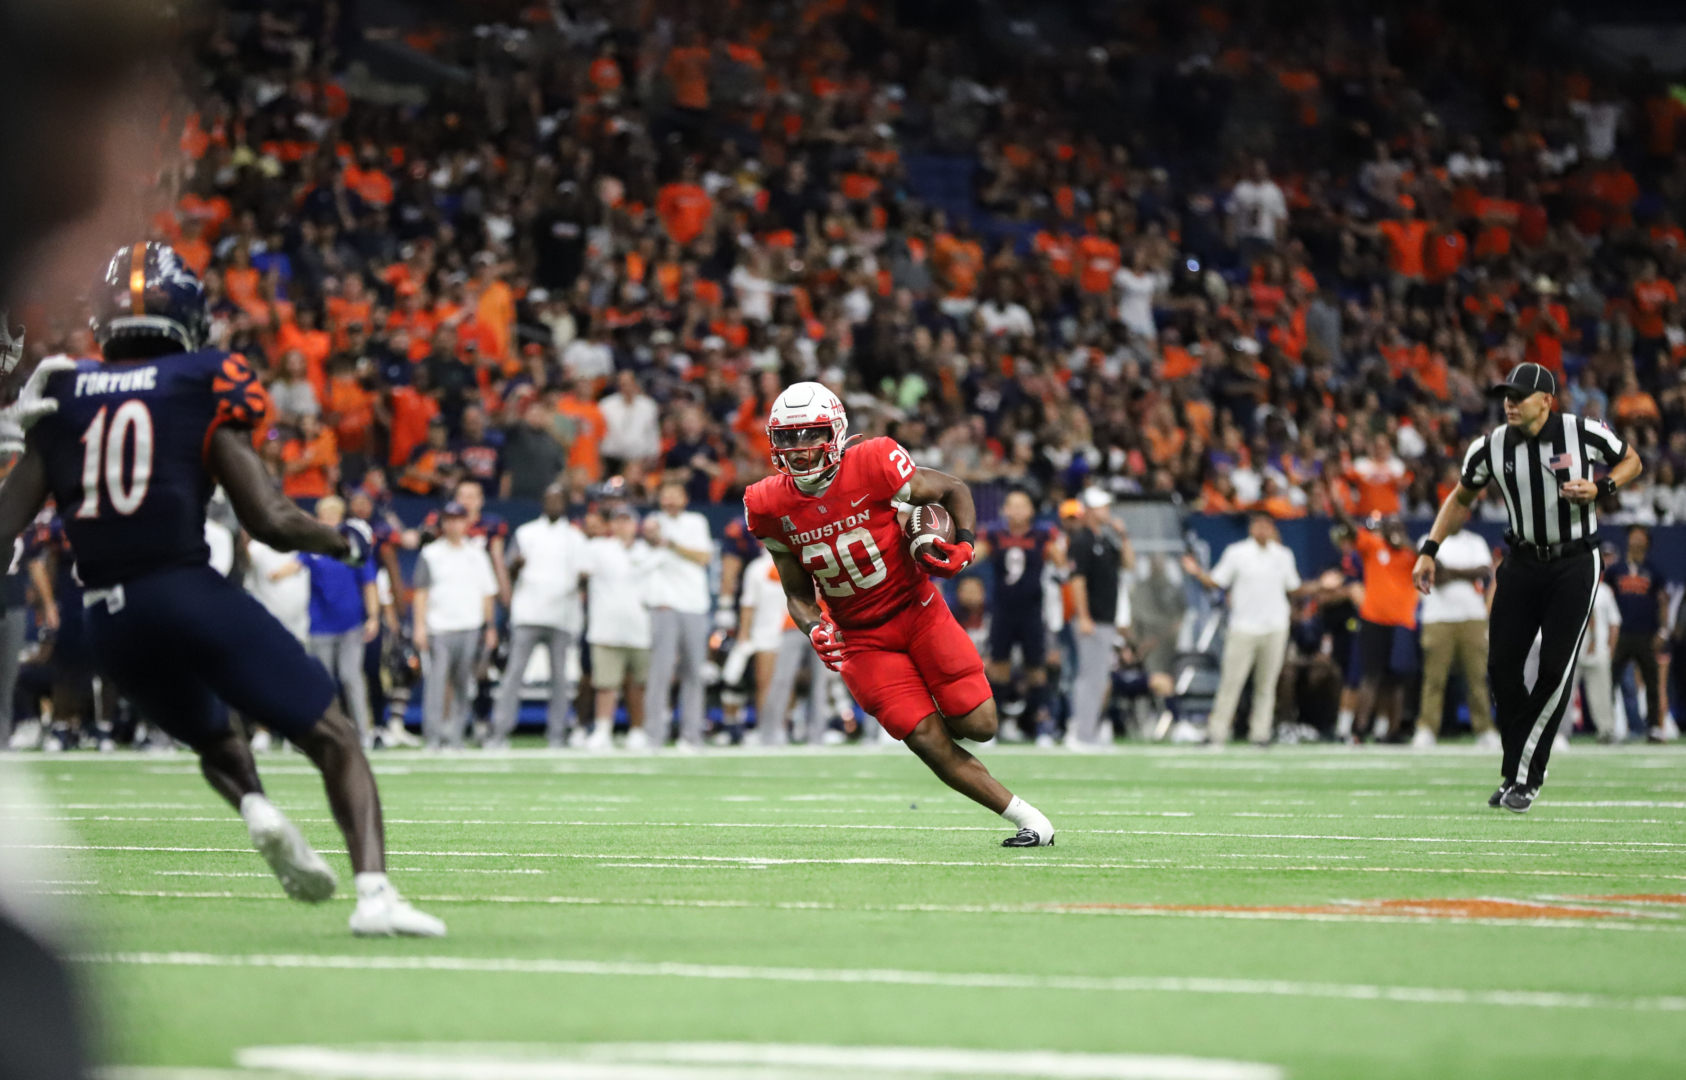 Freshman running back Brandon Campbell leads UH football in rushing yards with 139 yards two games into the 2022 season. | Sean Thomas/The Cougar